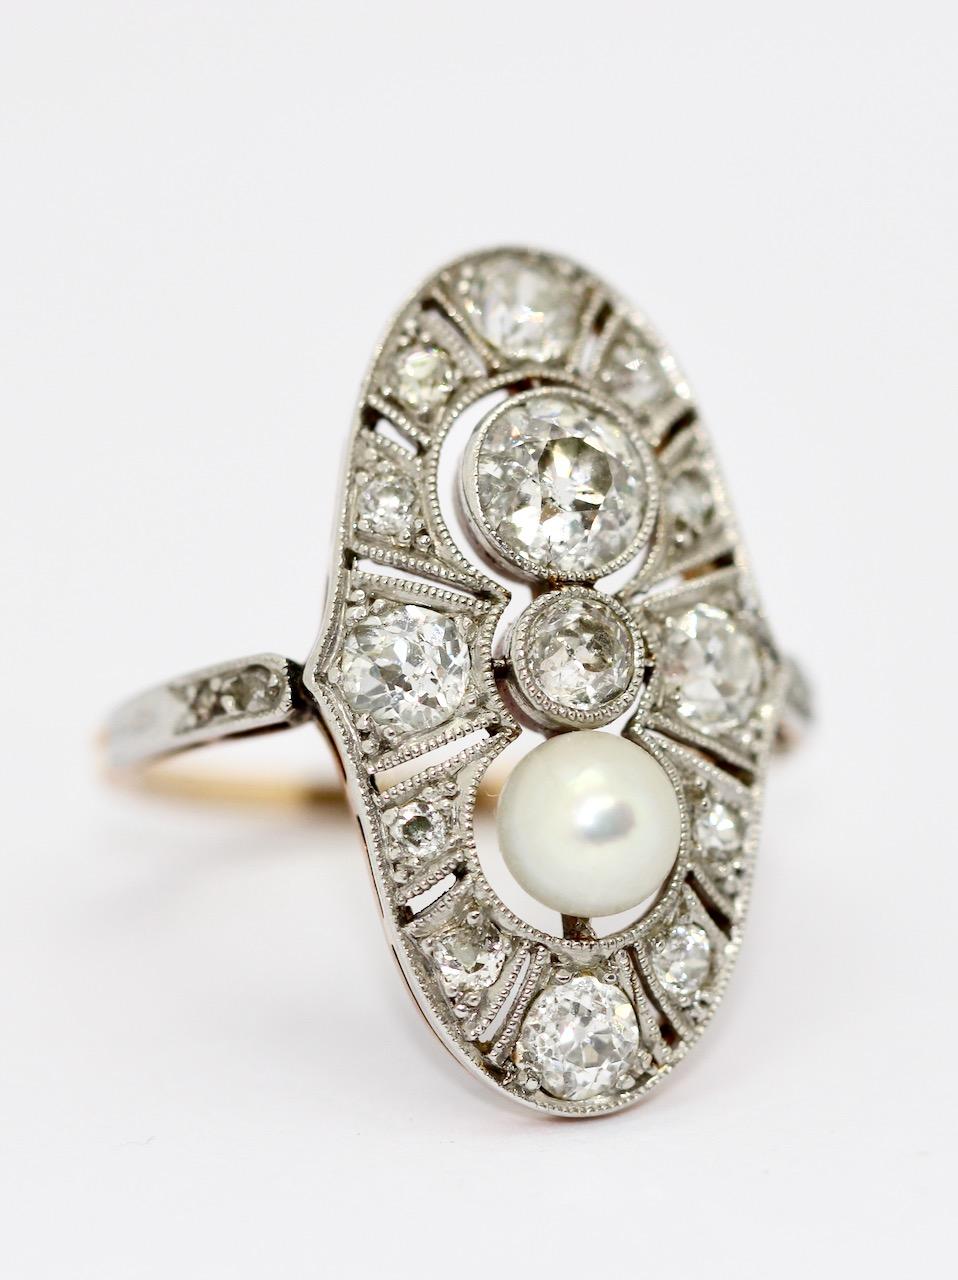 Charming Art Deco ring, red gold and platinum, set with diamonds and natural pearl.

The large diamond has a size of approx. 0.7 carat
The pearl has a diameter of approx. 5.2 mm

Dimensions ring head: 25.2mm x 14.4mm

Includes certificate of